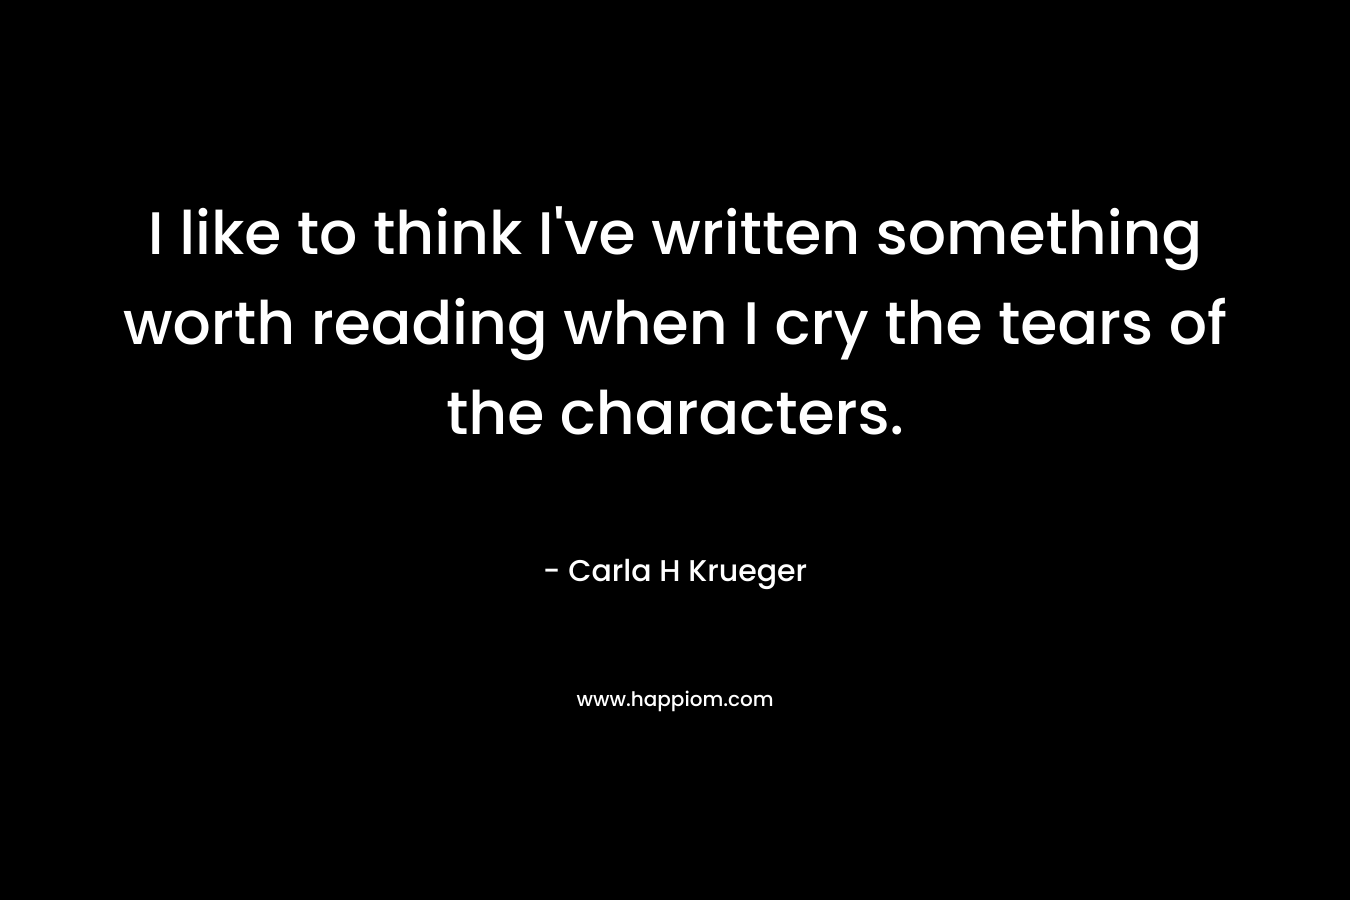 I like to think I’ve written something worth reading when I cry the tears of the characters. – Carla H Krueger